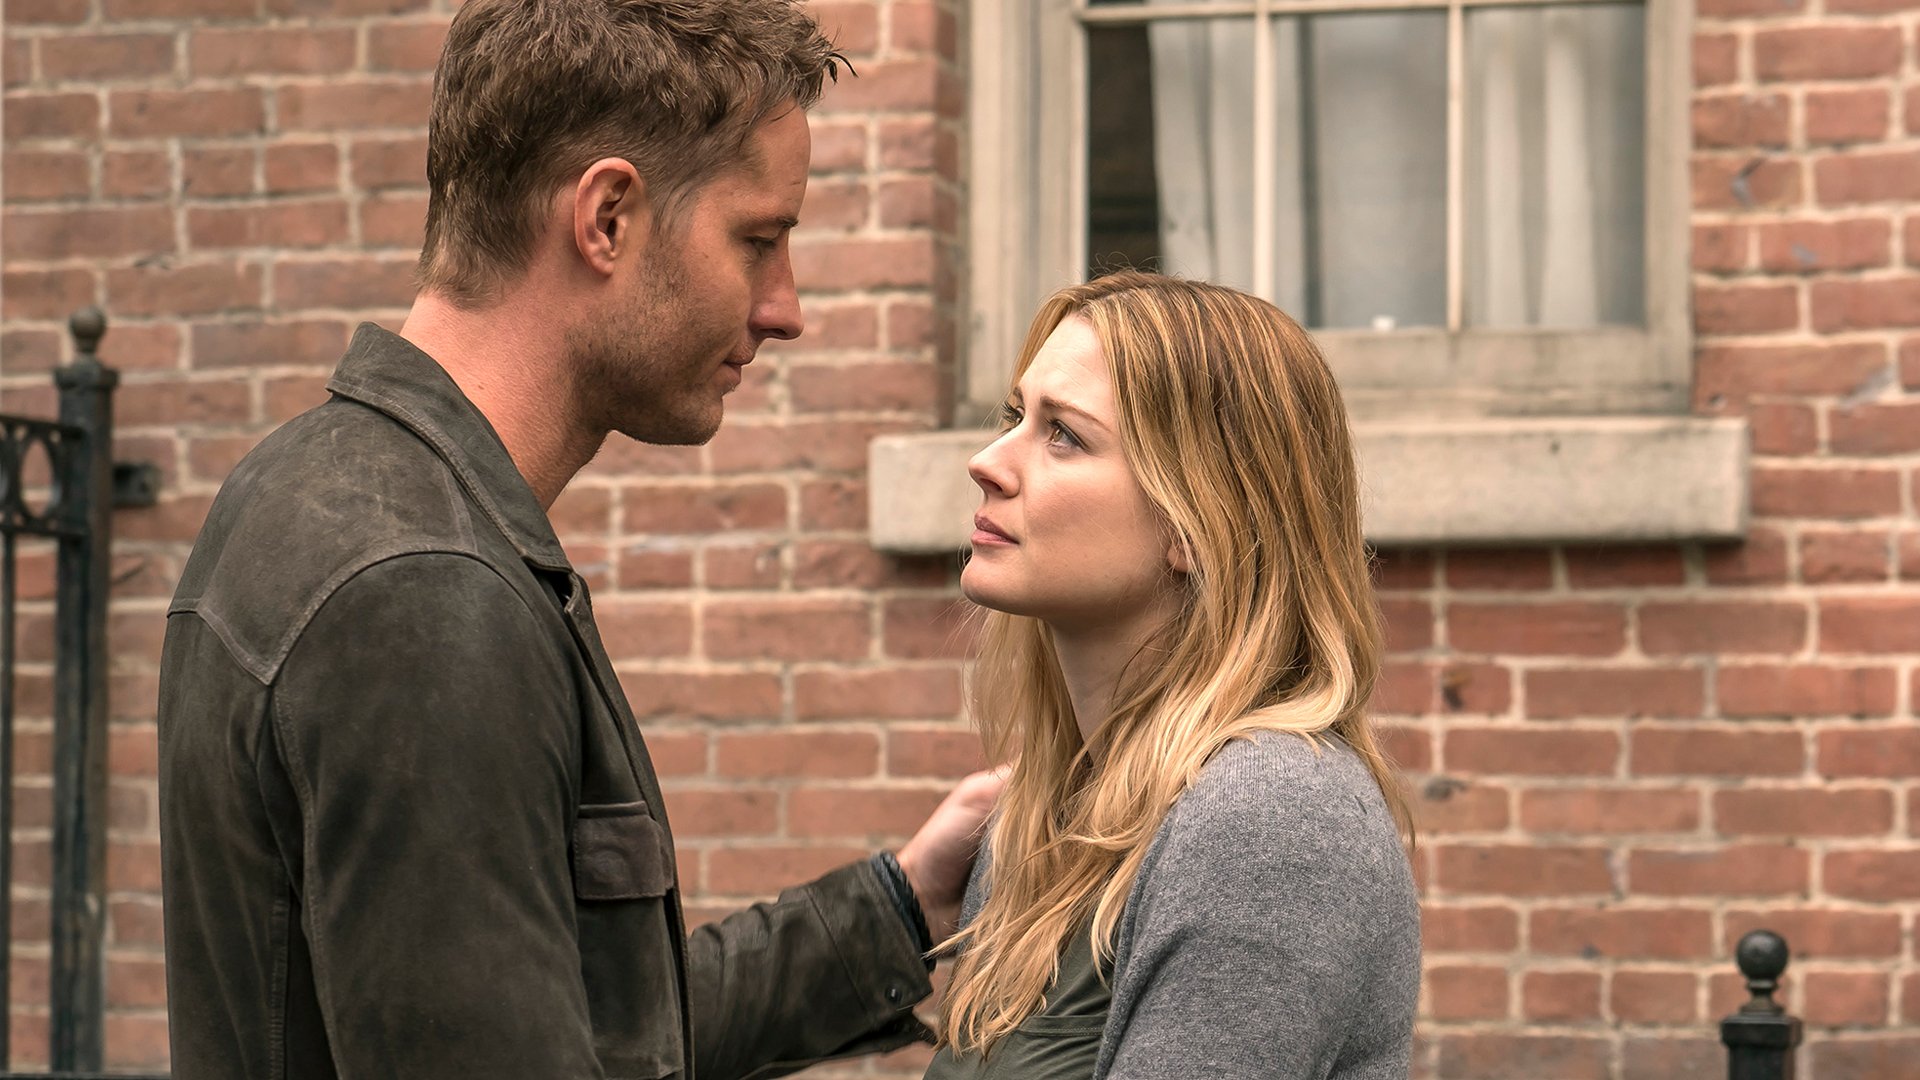 Justin Hartley as Kevin and Alexandra Breckenridge as Sophie look at each other with concerned expressions in ‘This Is Us’ Season 1